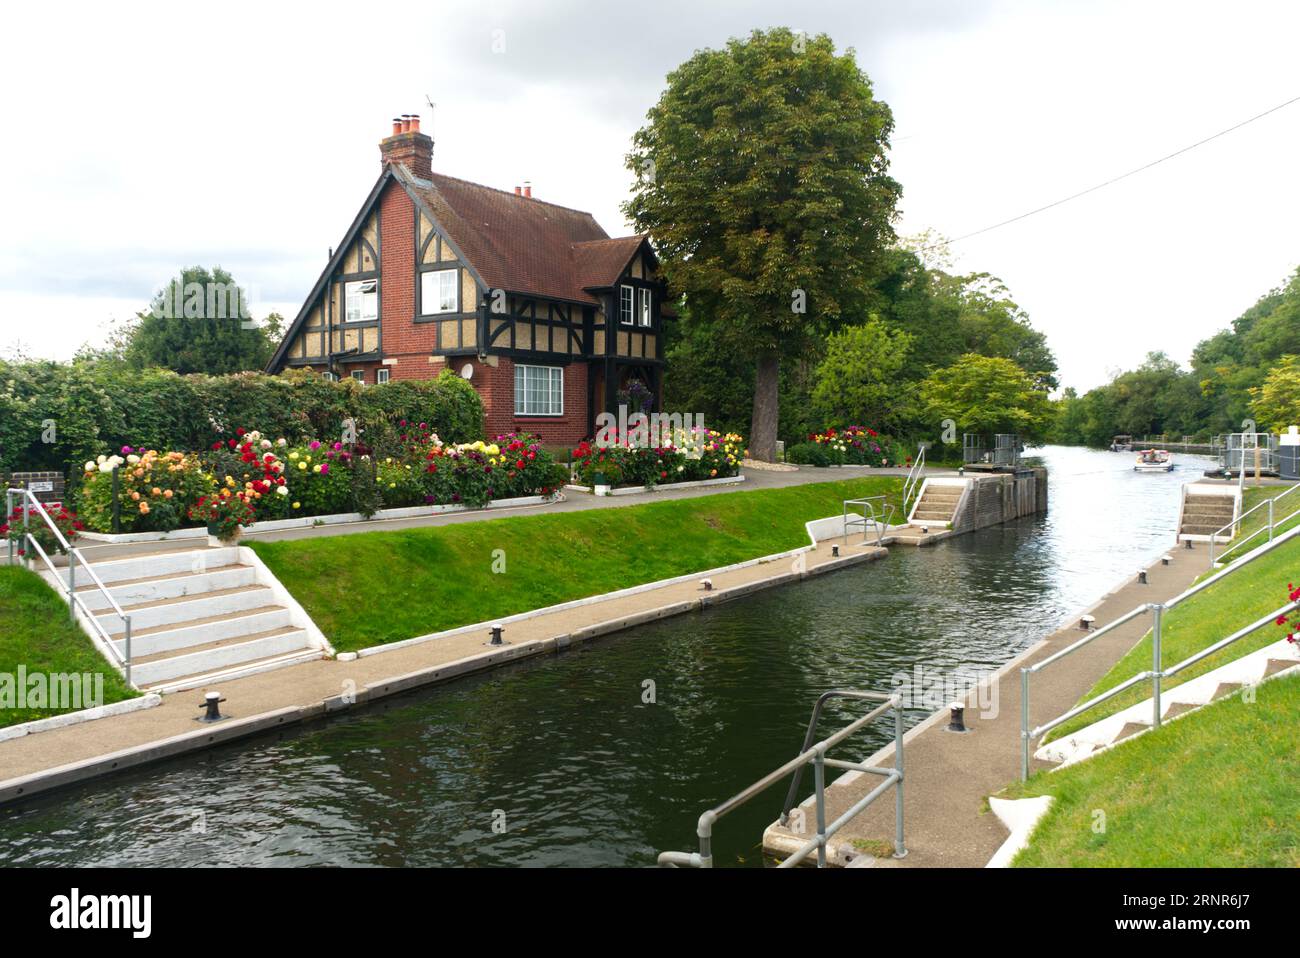 Bray Lock and Lock Keeper's Cottage on the River Thames at Bray, Berkshire. Stock Photo